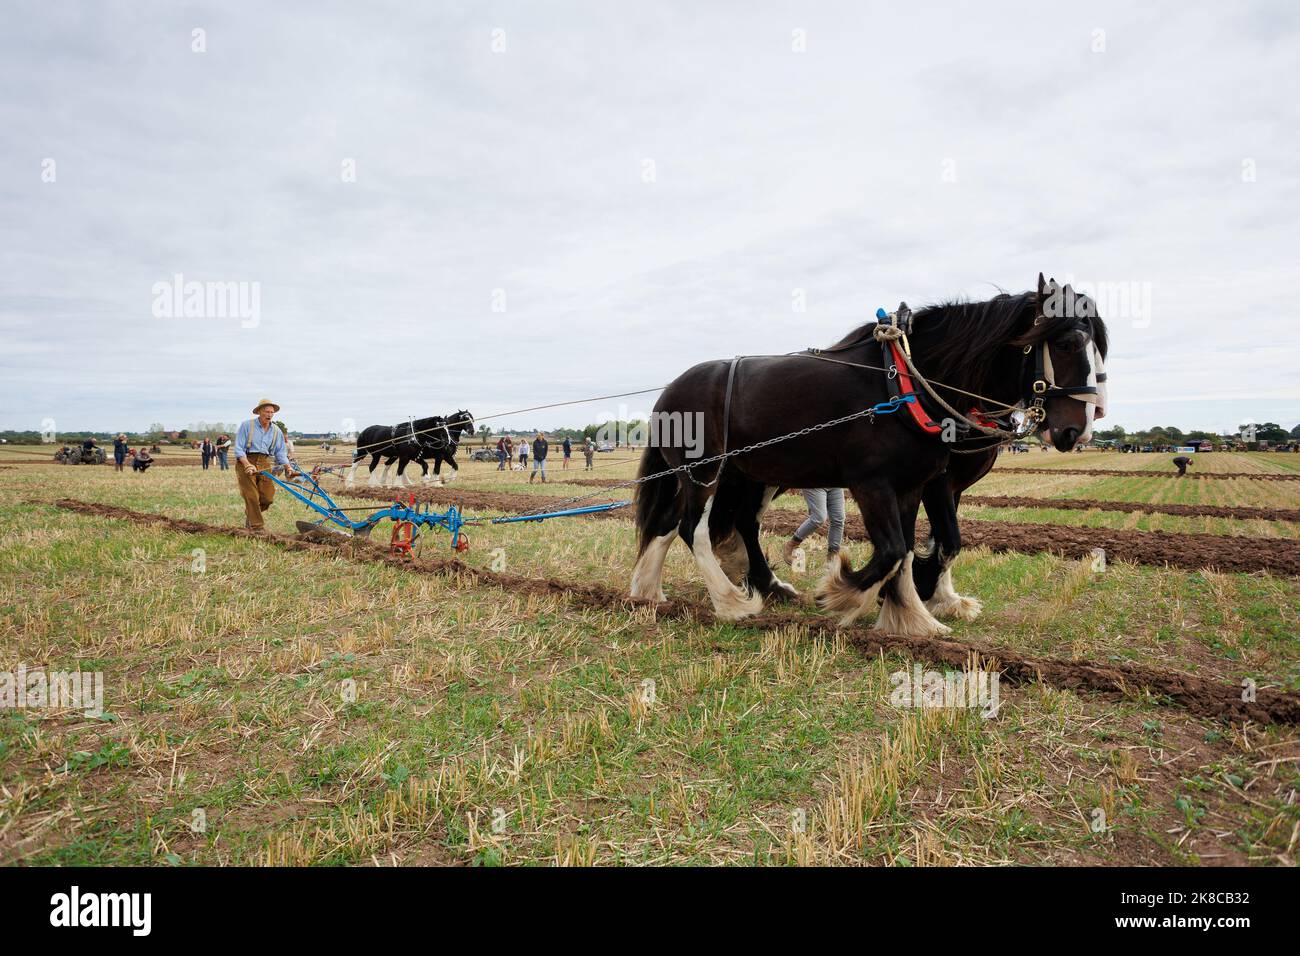 The Sheepy and District 106th Annual ploughing, hedecutting and ditching competition held in North Warwickshire, England. The event showcases the ability to plough using either modern, vintage tractors or horses. Picture shows competitors using horses to plough. Stock Photo